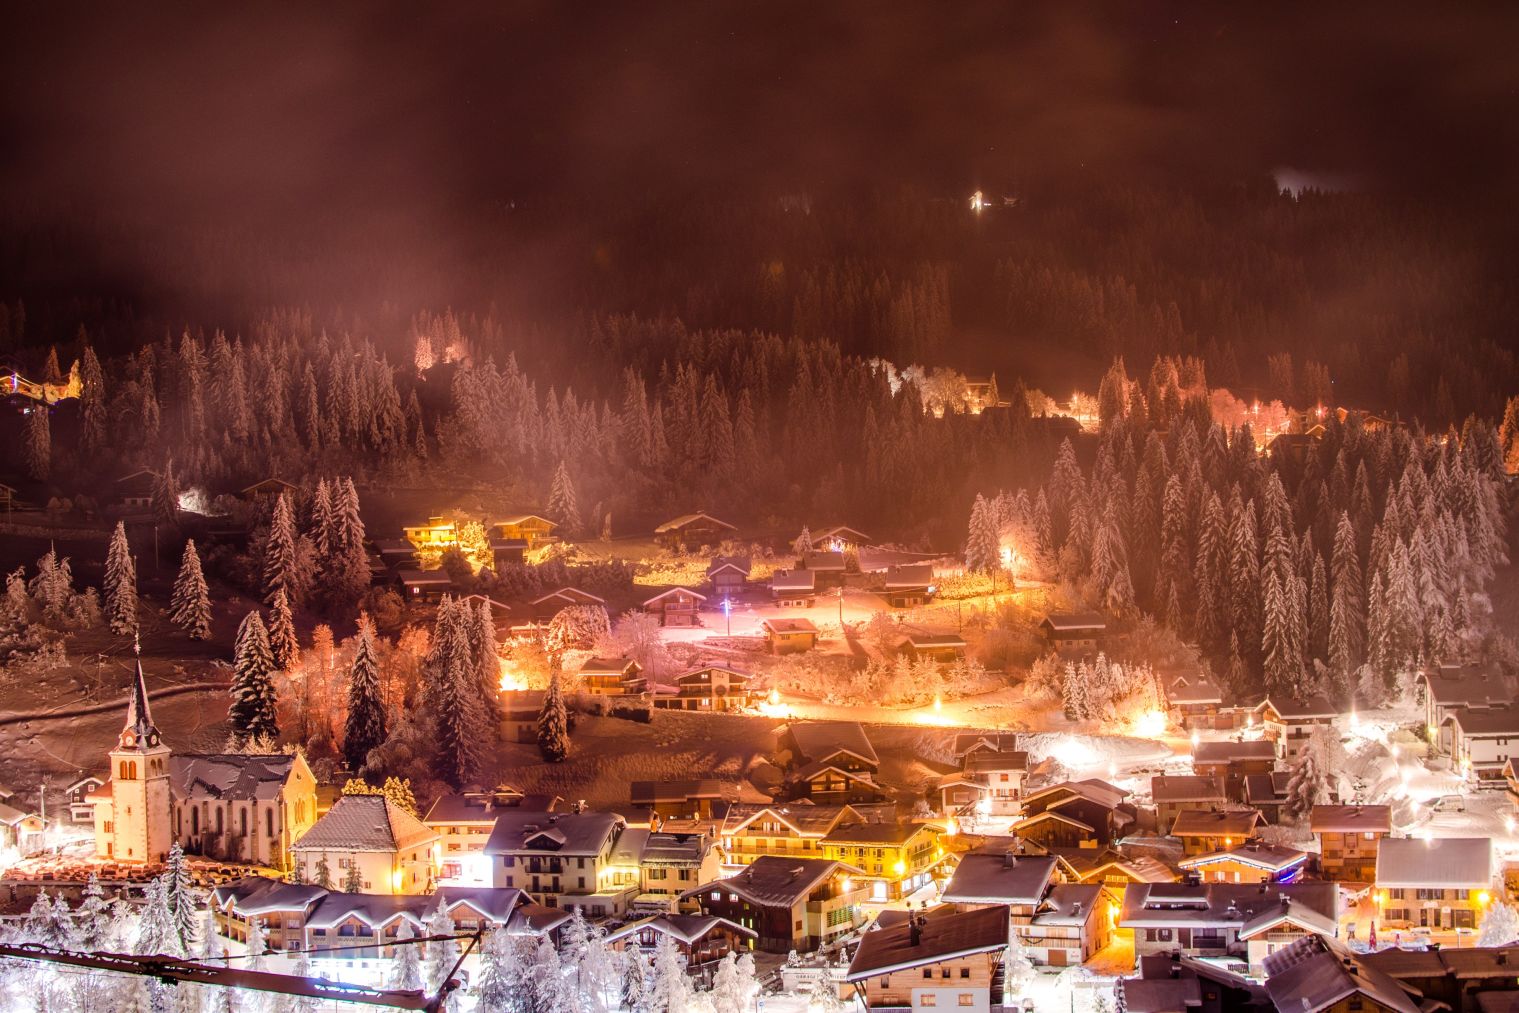 An amazing ski resort in mountains during a Christmas ski holiday 2021